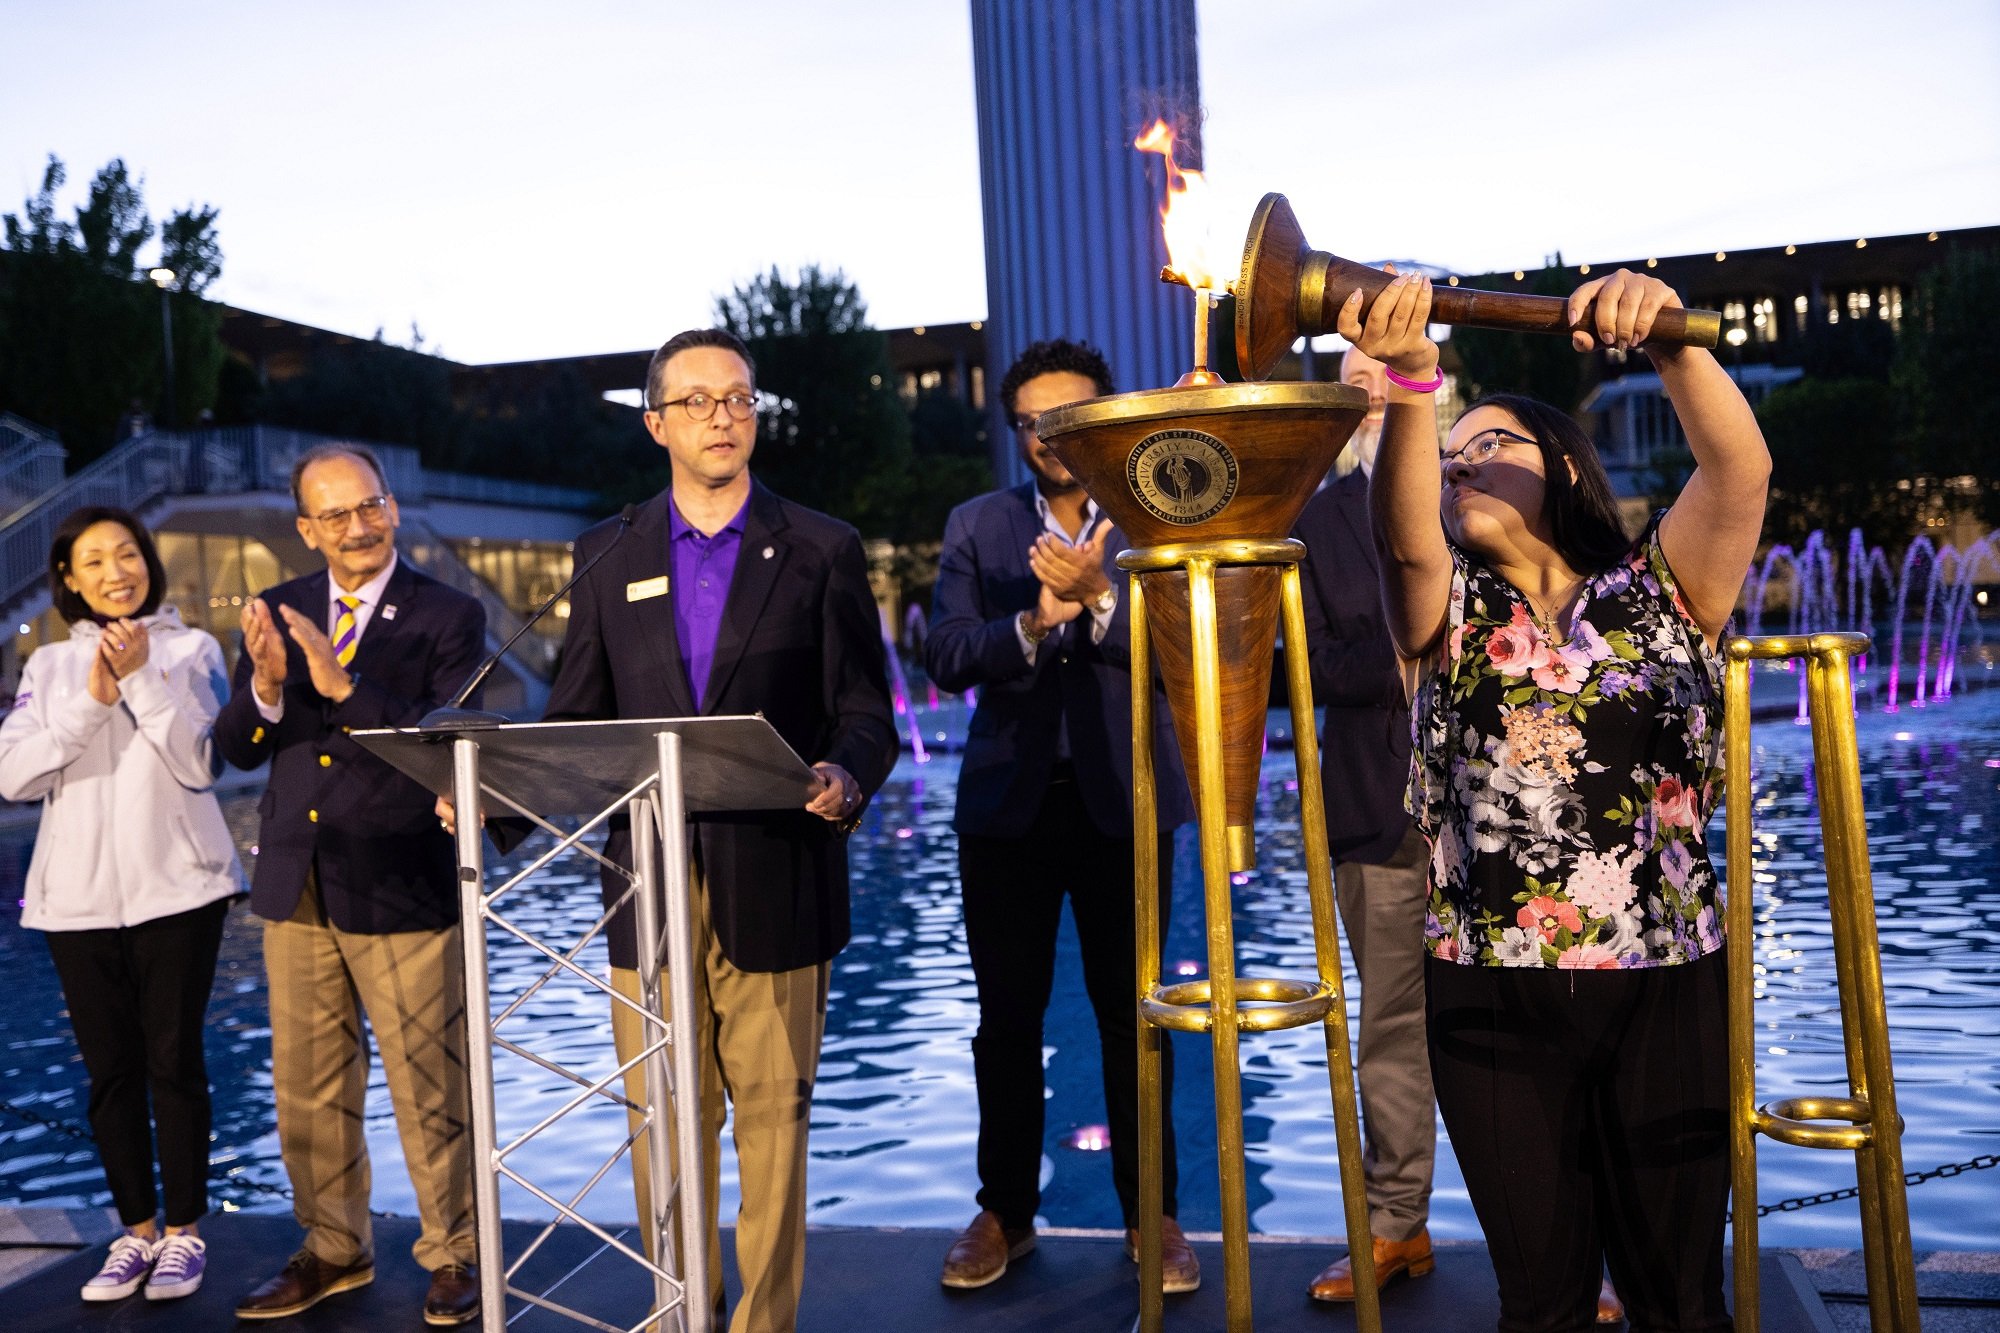 A UAlbany student lights the ceremonial torch at the main fountain alongside UAlbany faculty, staff and alumni.